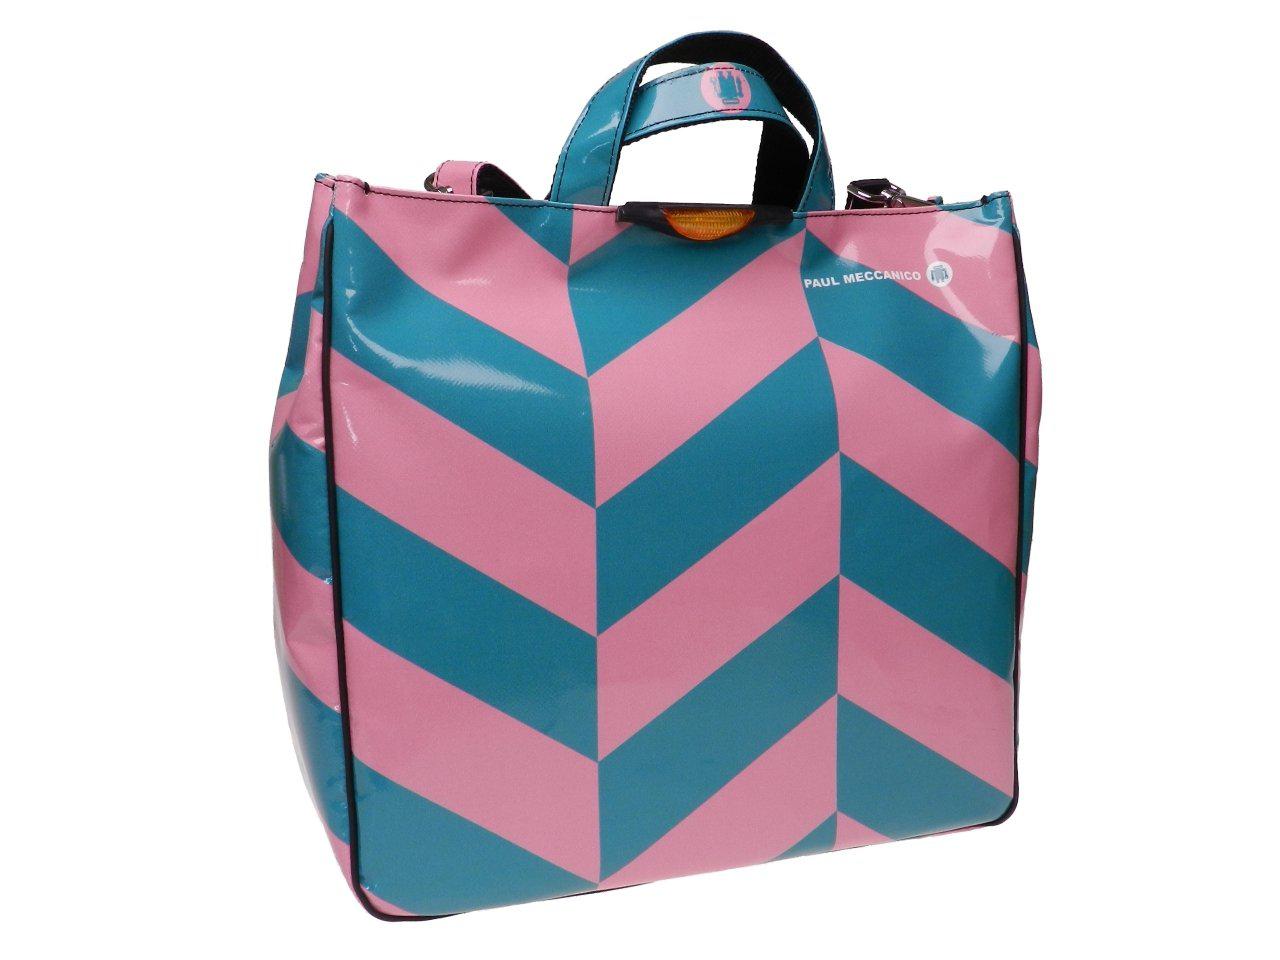 MAXI TOTE BAG PINK AND TEAL WITH GEOMETRIC FANTASY. MODEL AIRSTONE MADE OF LORRY TARPAULIN. - Unique Pieces Paul Meccanico